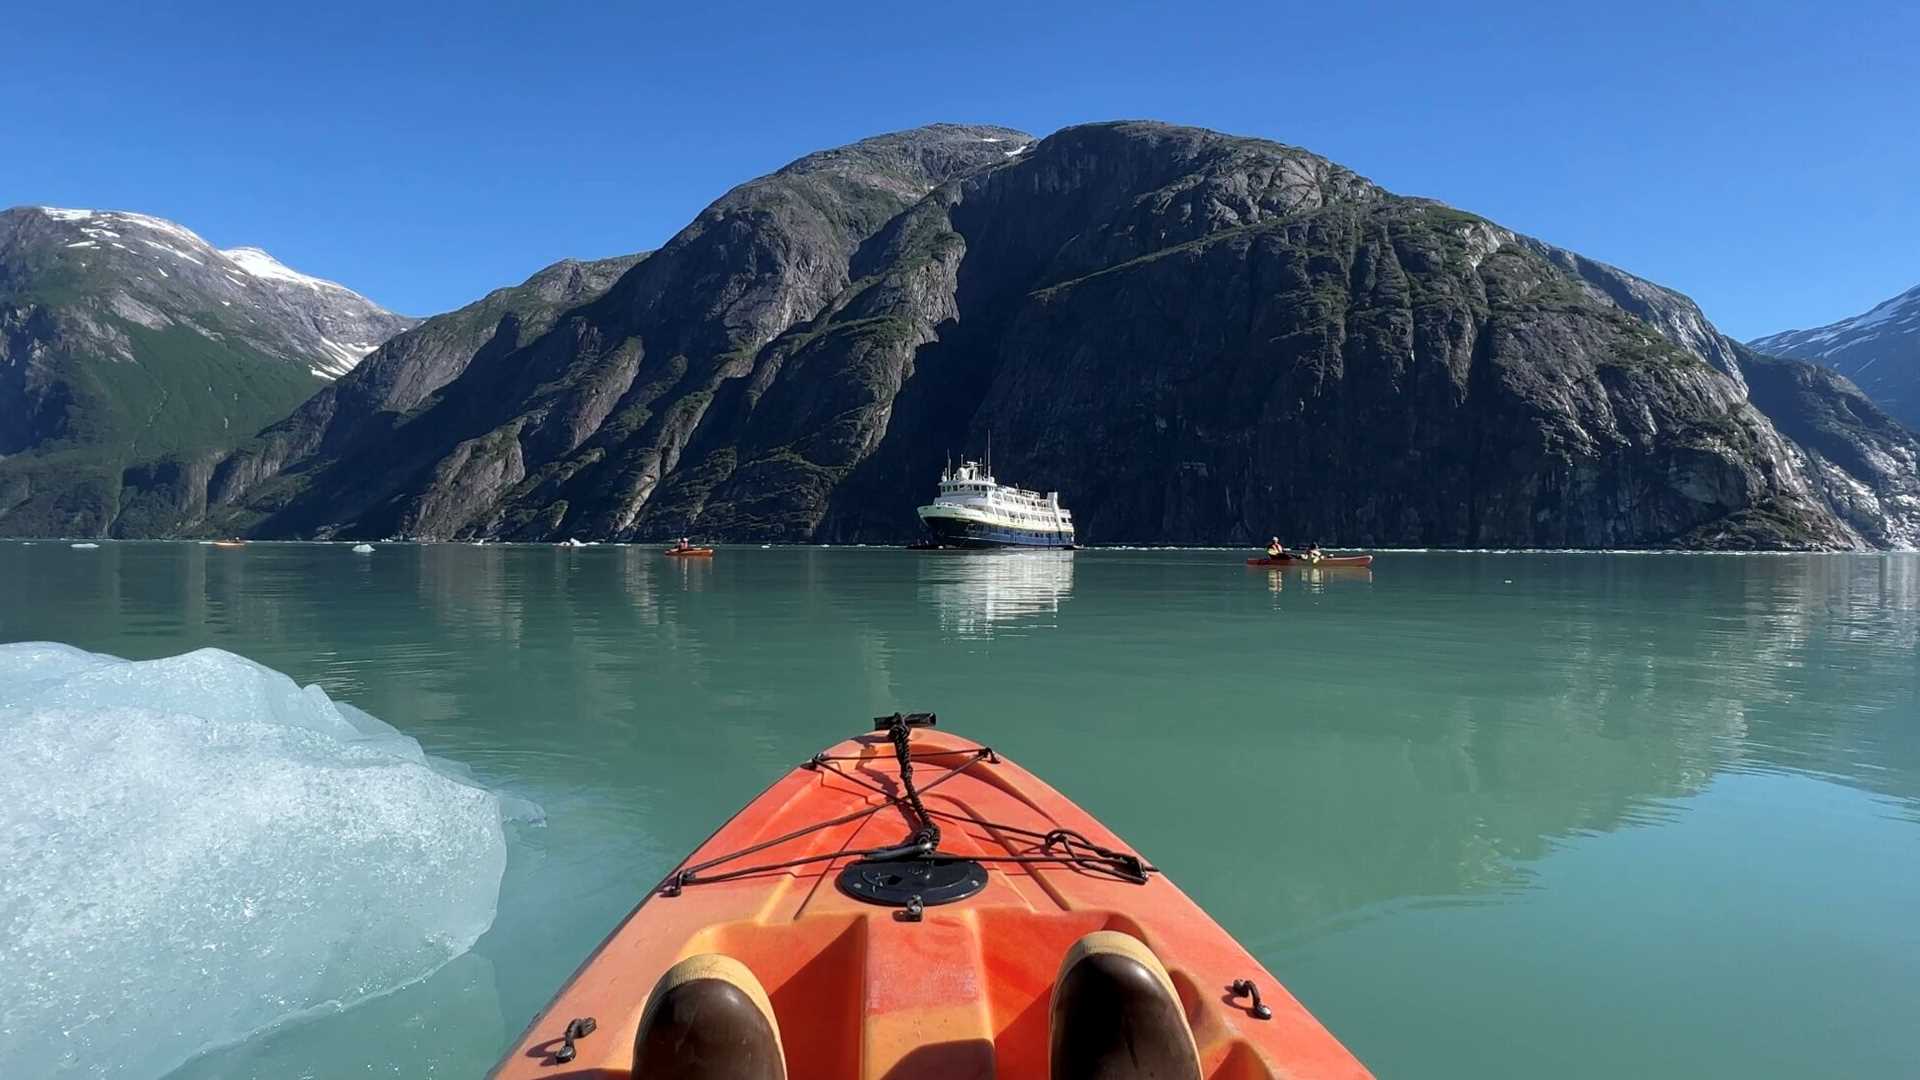 Tracy Arm-Fords Terror Wilderness Area and South Sawyer Glacier